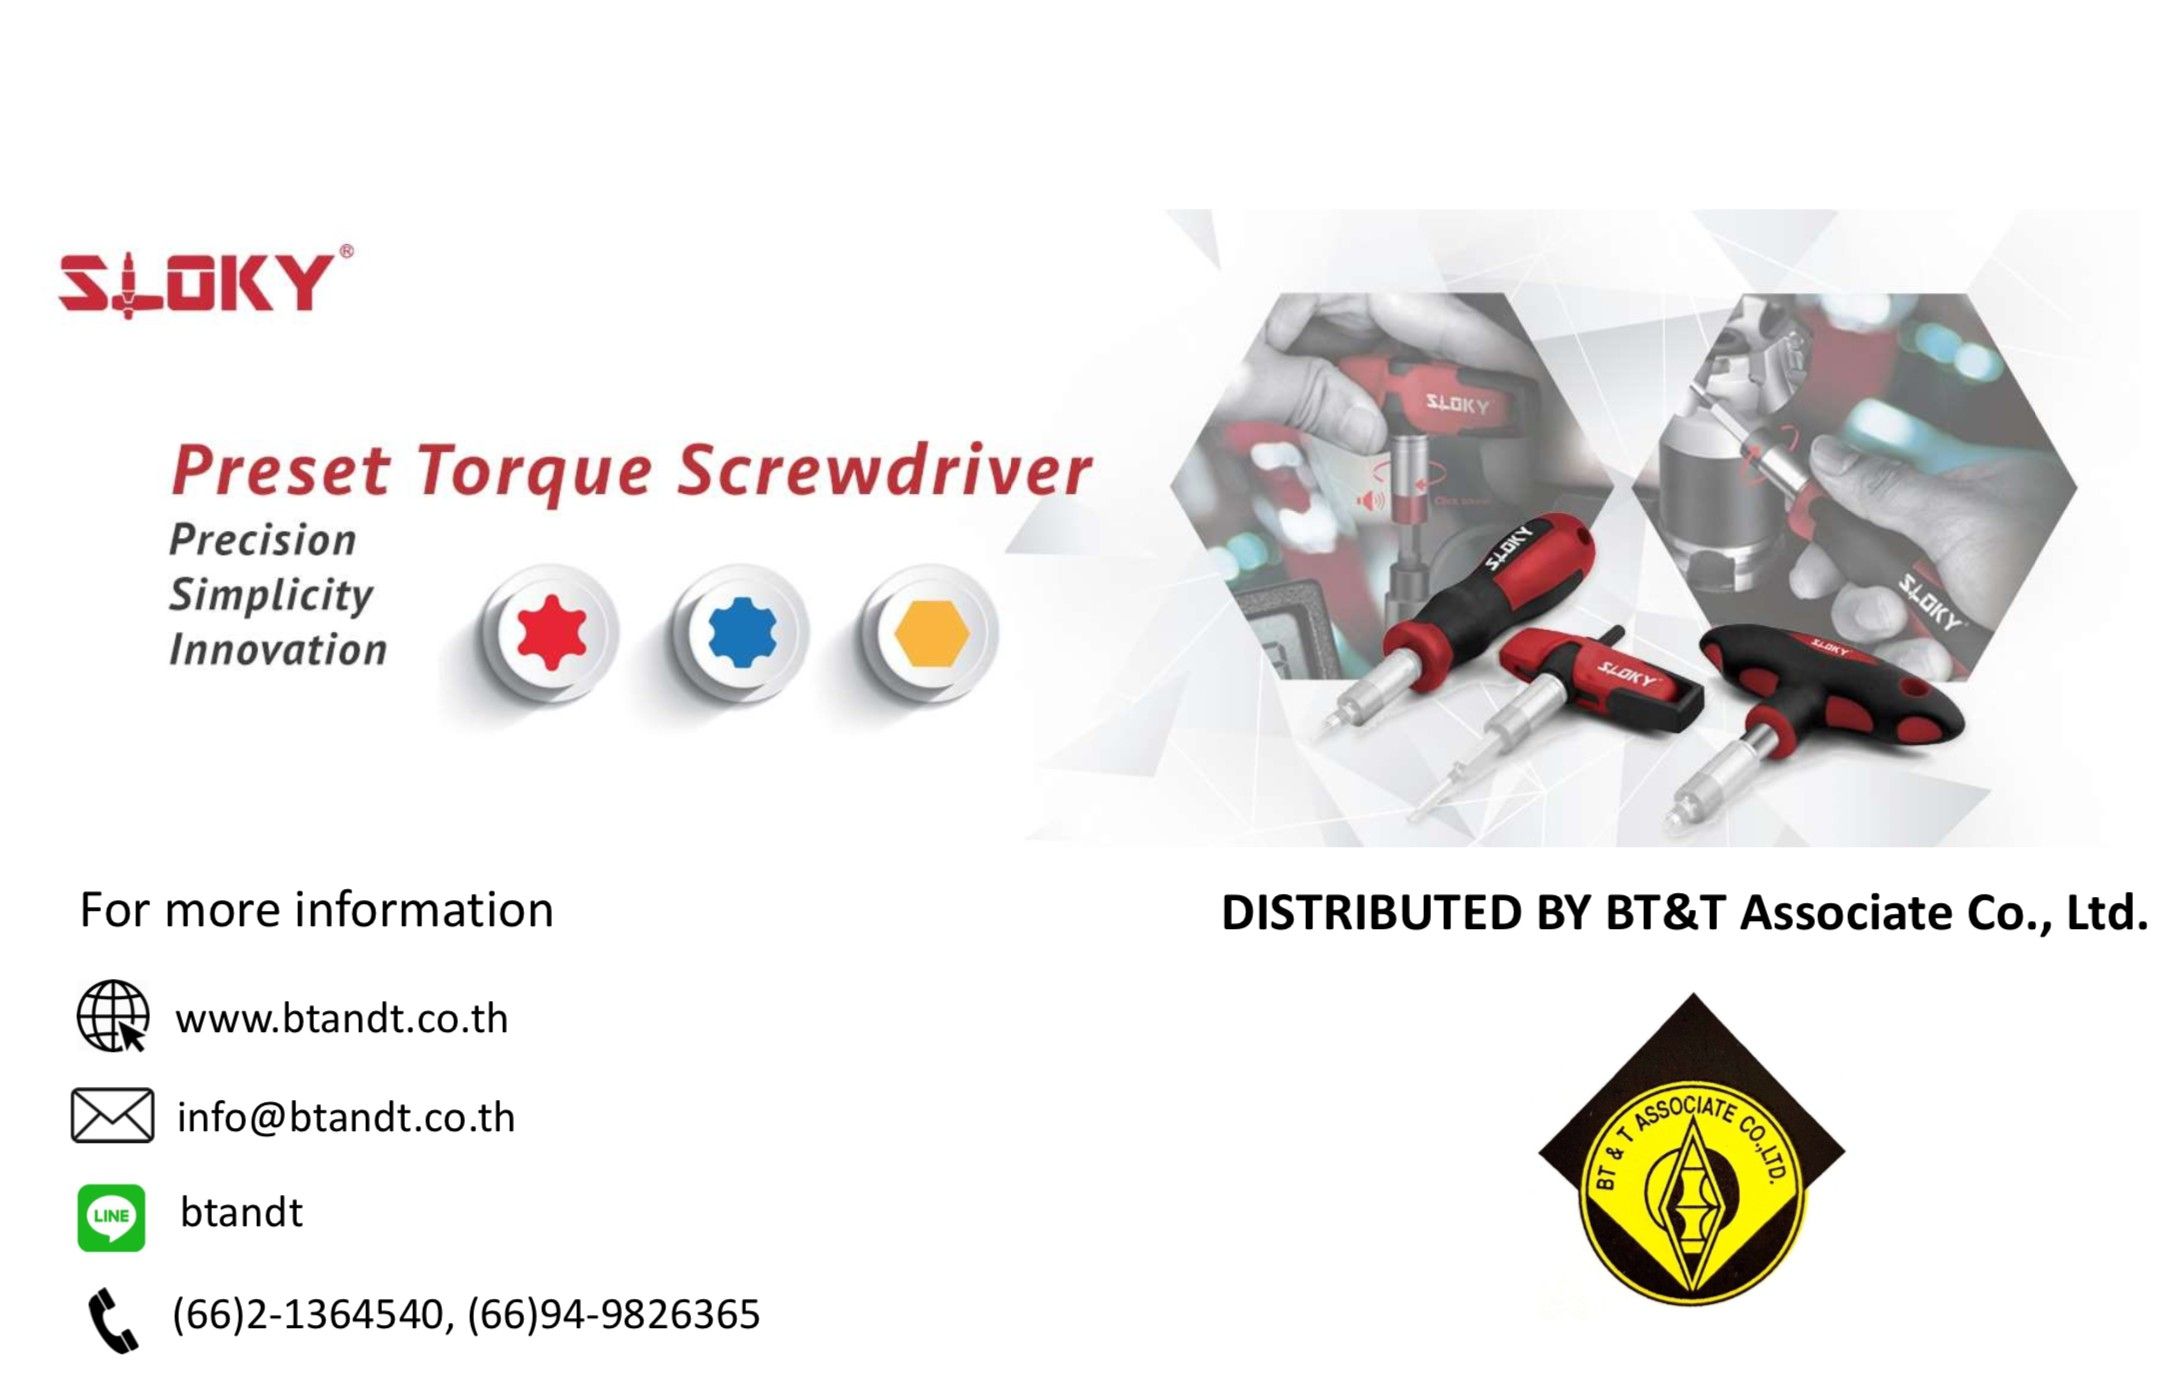 Sloky torque screwdriver promoted by BT&T in Thailand; originally designed for CNC cutting tools of precision machining and milling.